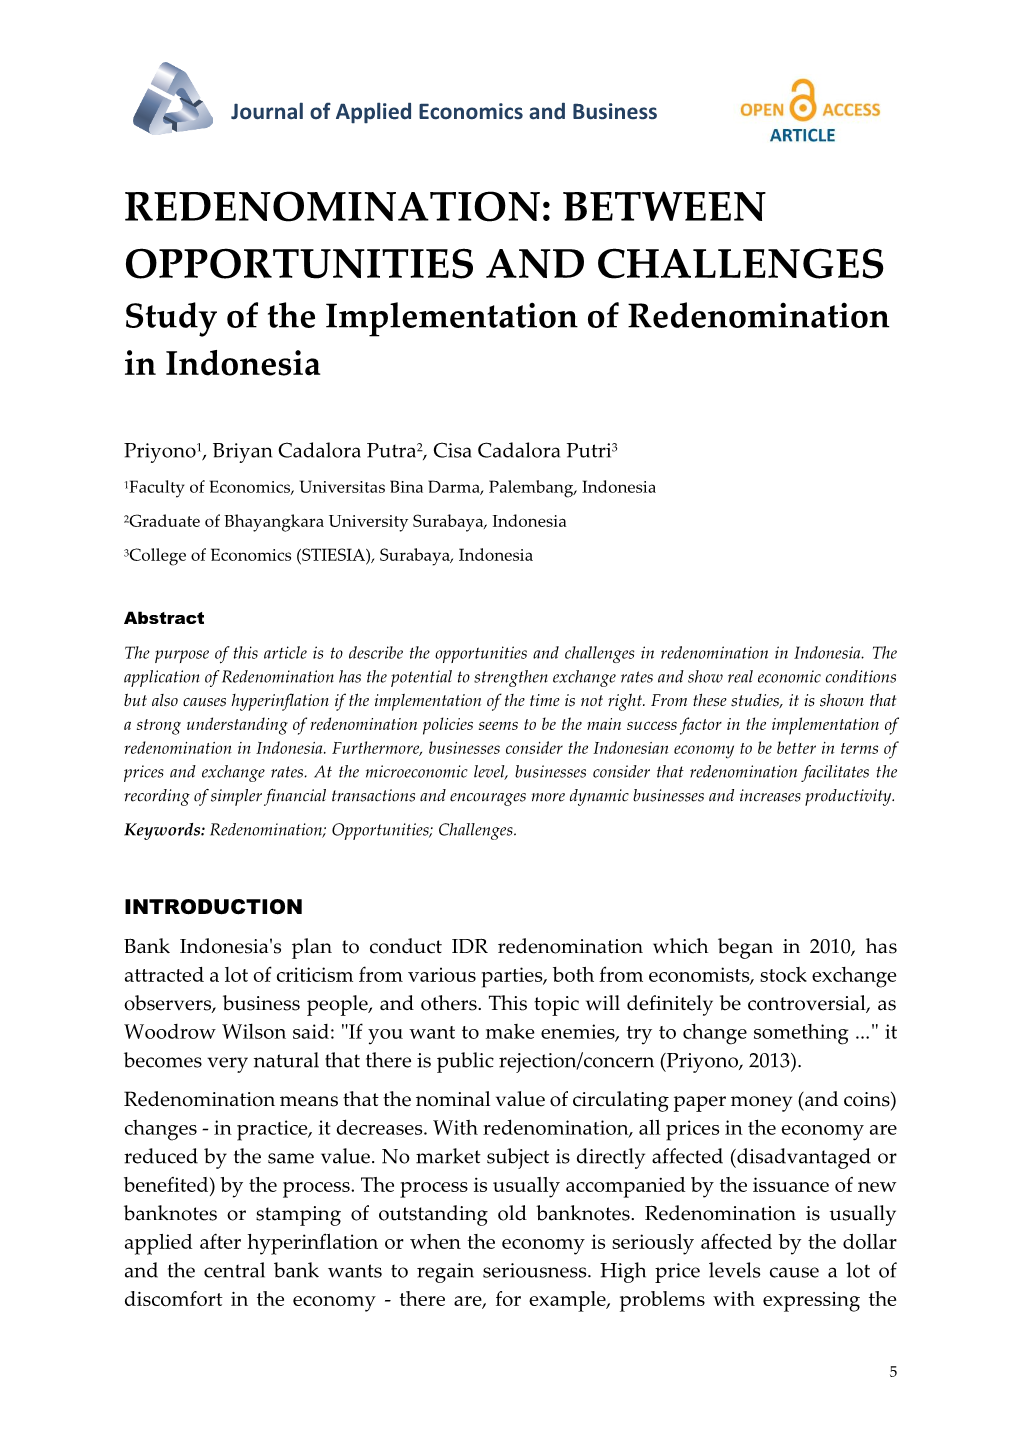 REDENOMINATION: BETWEEN OPPORTUNITIES and CHALLENGES Study of the Implementation of Redenomination in Indonesia